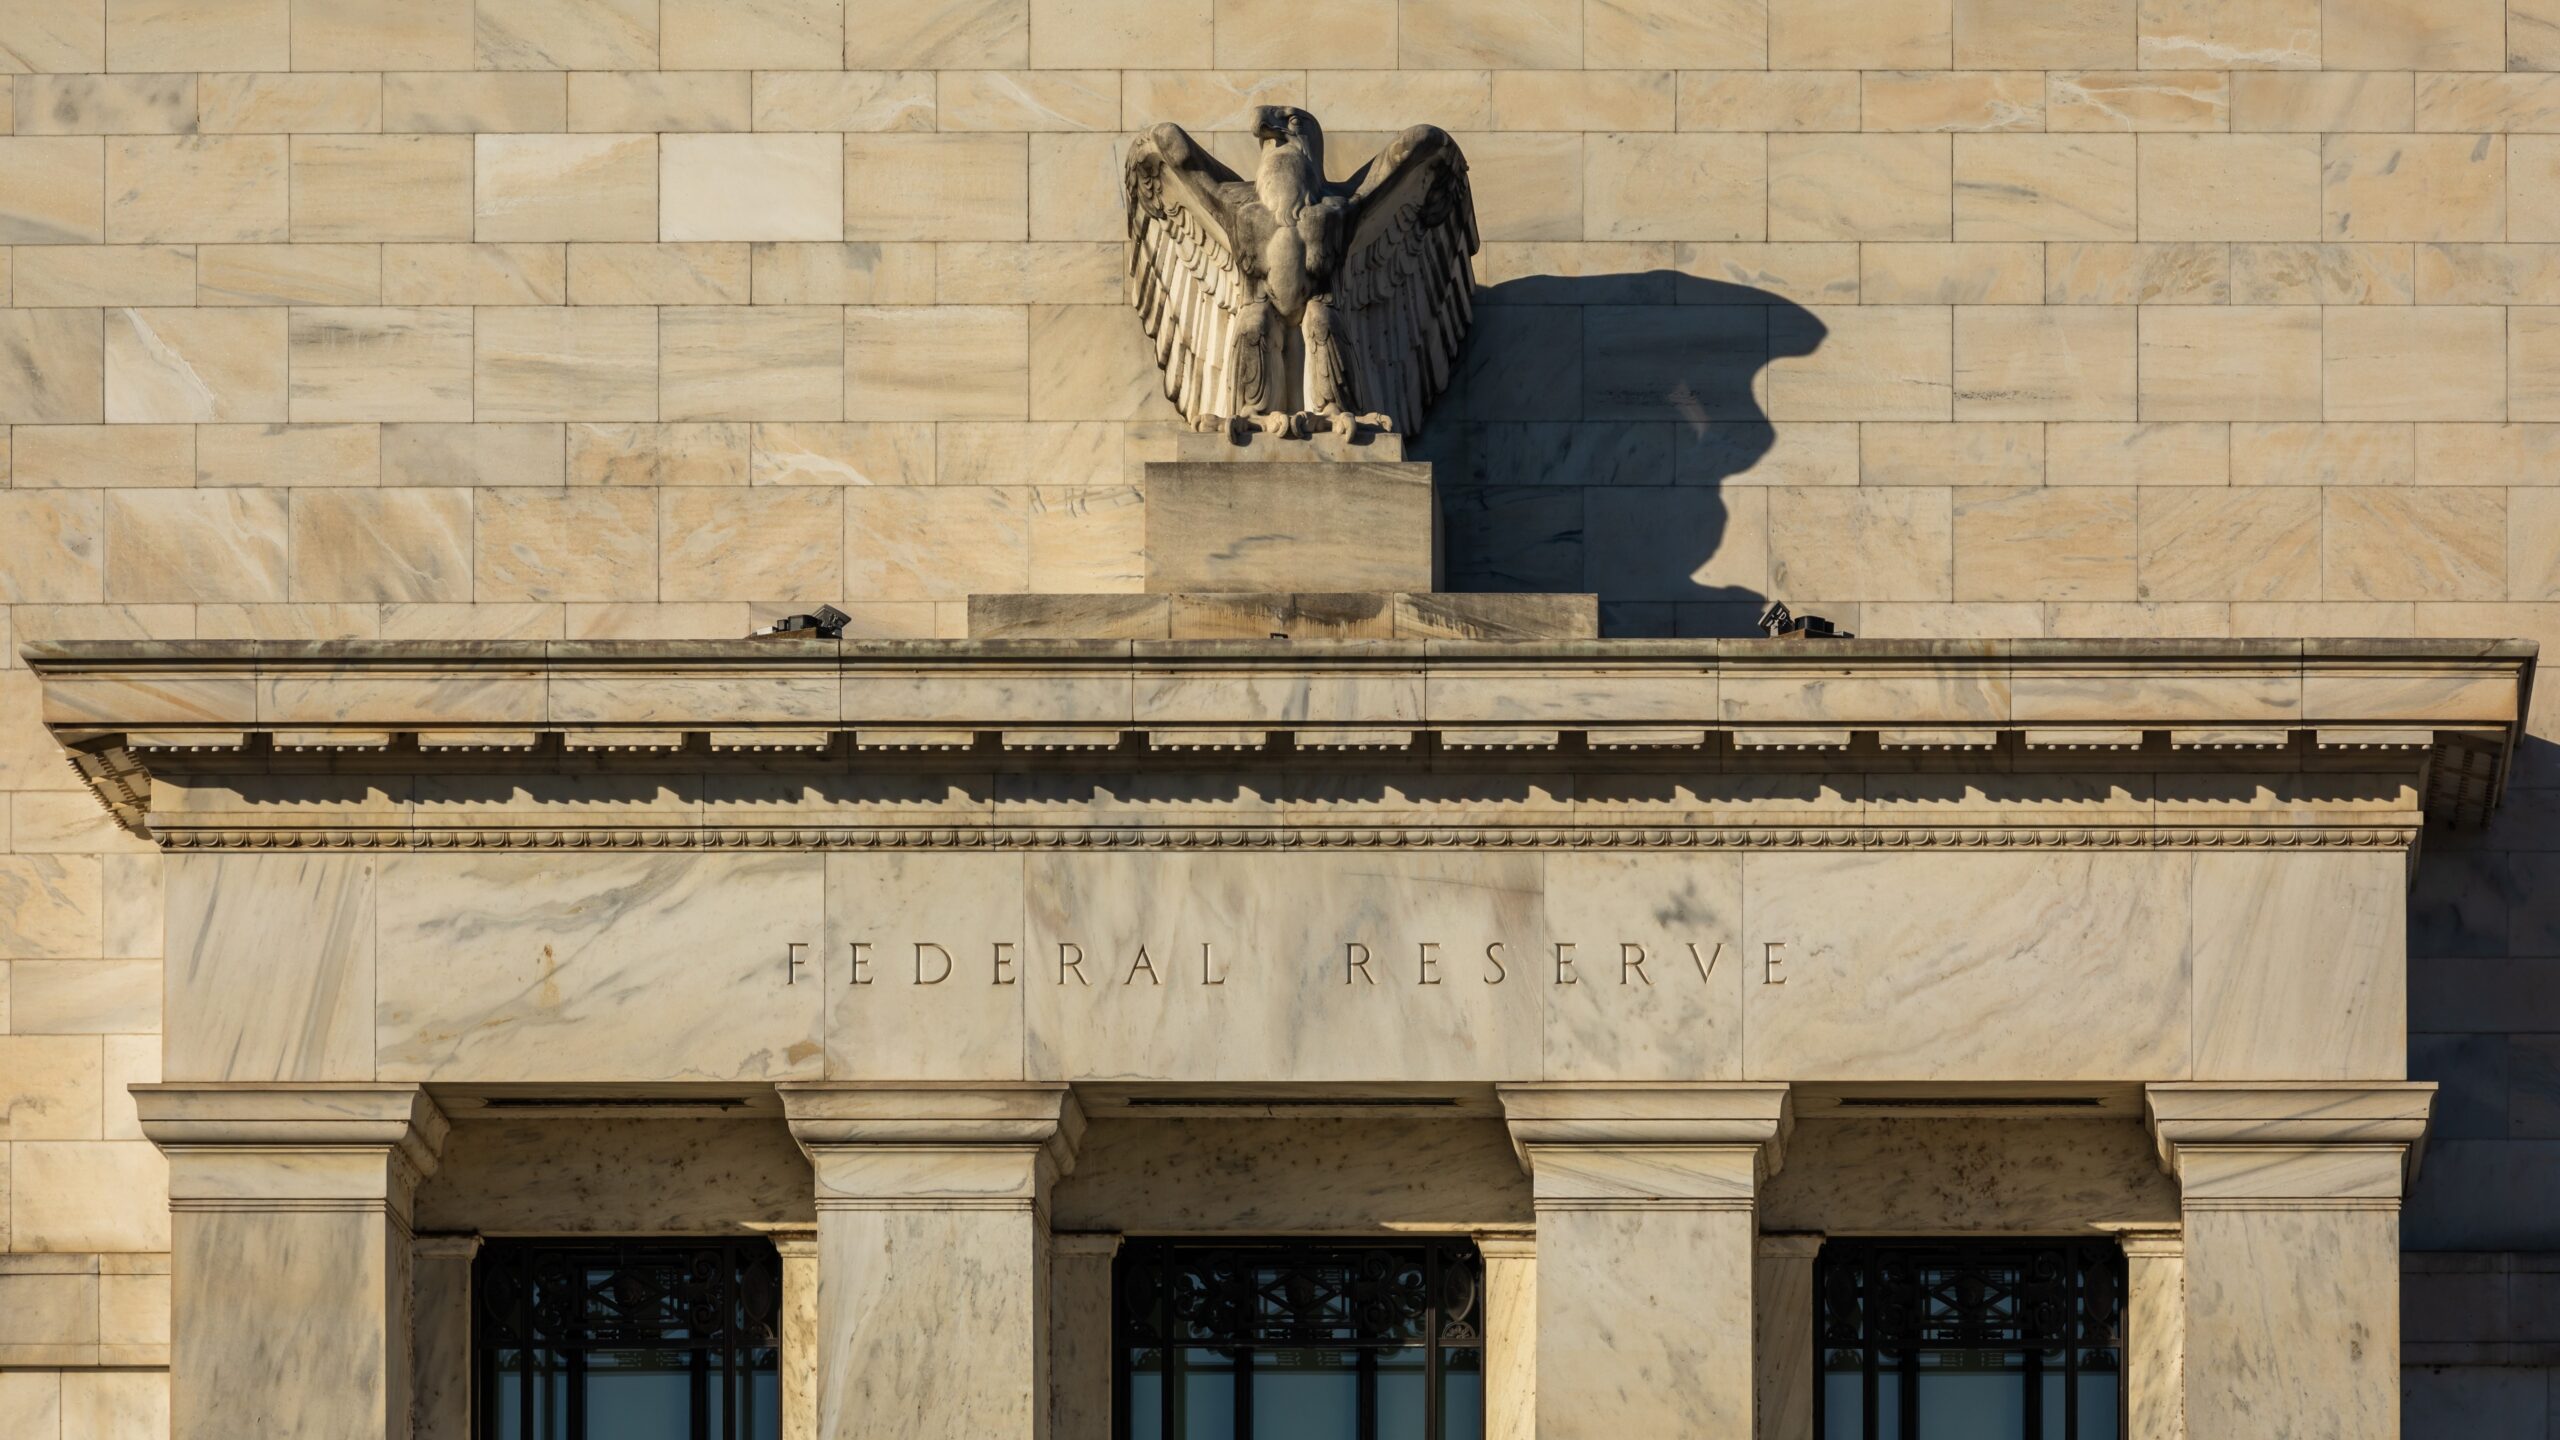 The image depicts the facade of the Federal Reserve building. The building's architectural style is classical, with a prominent stone eagle sculpture centered above the entrance. Below the eagle, the words "Federal Reserve" are engraved in the stone. The facade is composed of large stone blocks, giving it a robust and monumental appearance. The image is taken in daylight, highlighting the texture and details of the stonework.